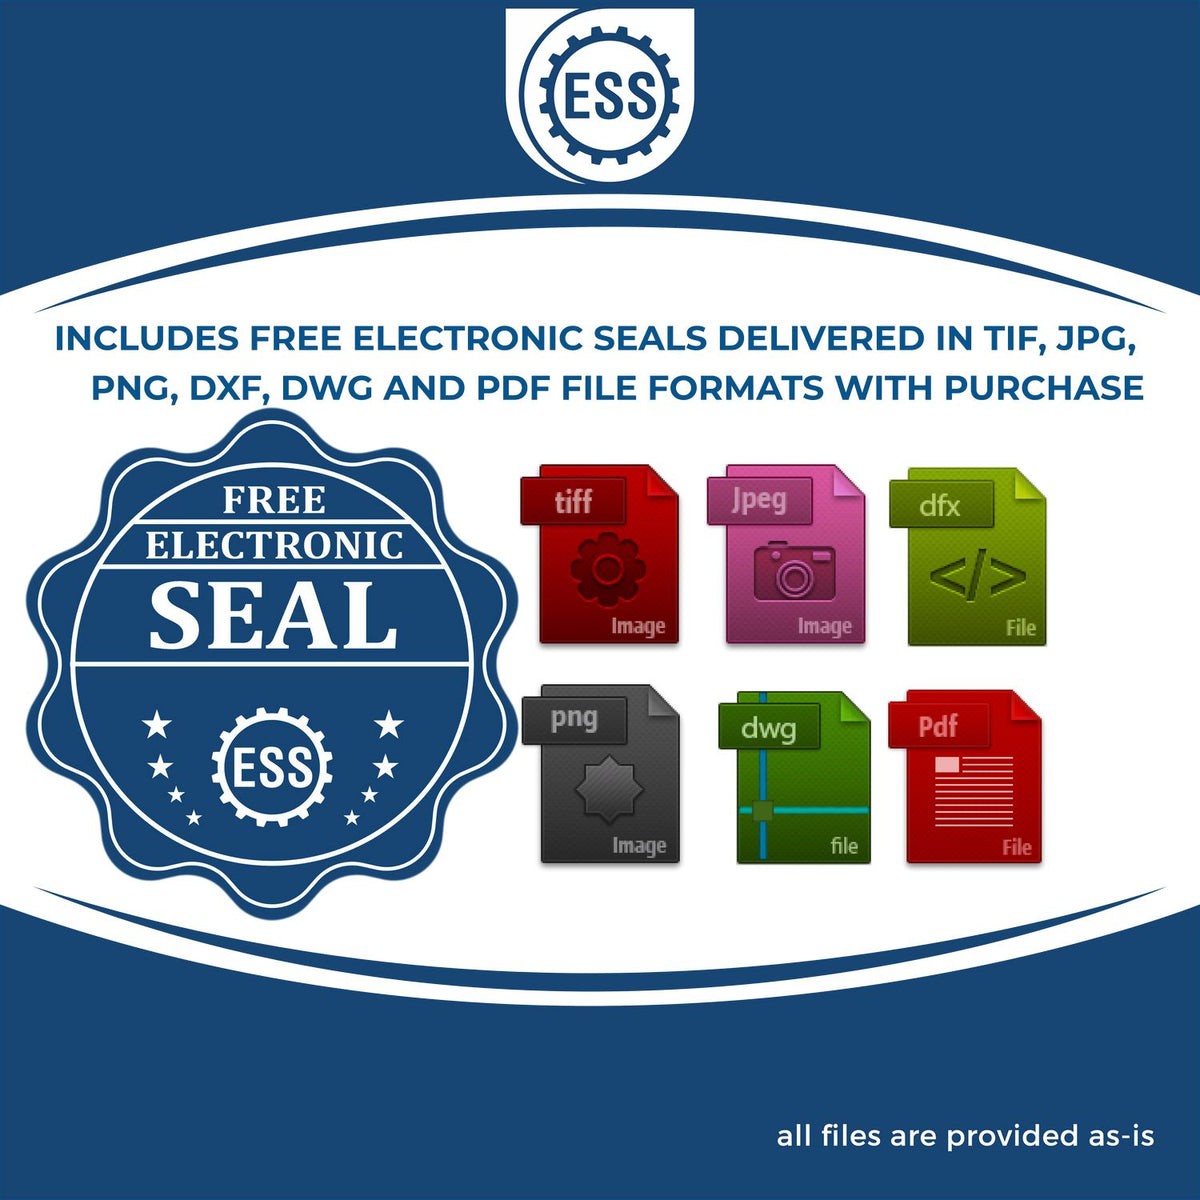 An infographic for the free electronic seal for the Kansas Professional Geologist Seal Stamp illustrating the different file type icons such as DXF, DWG, TIF, JPG and PNG.